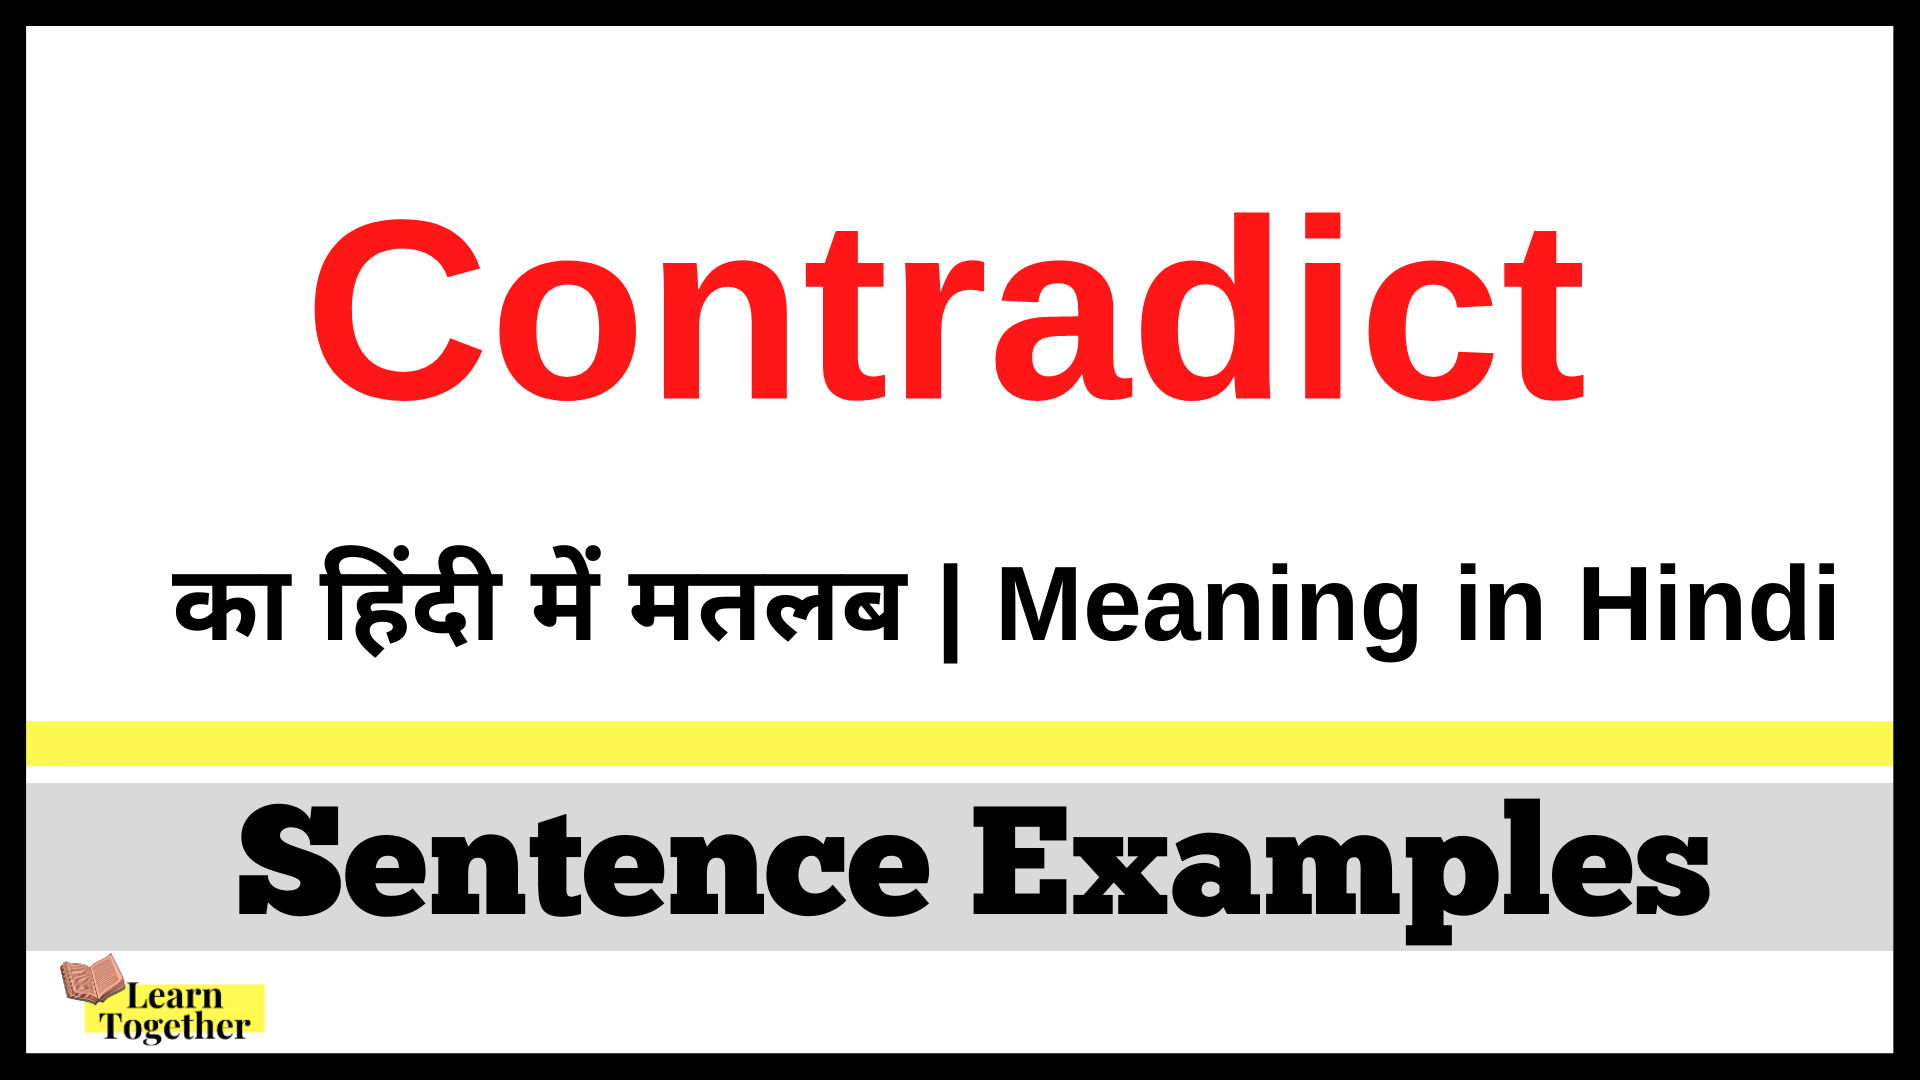 Contradict Meaning in Hindi.png